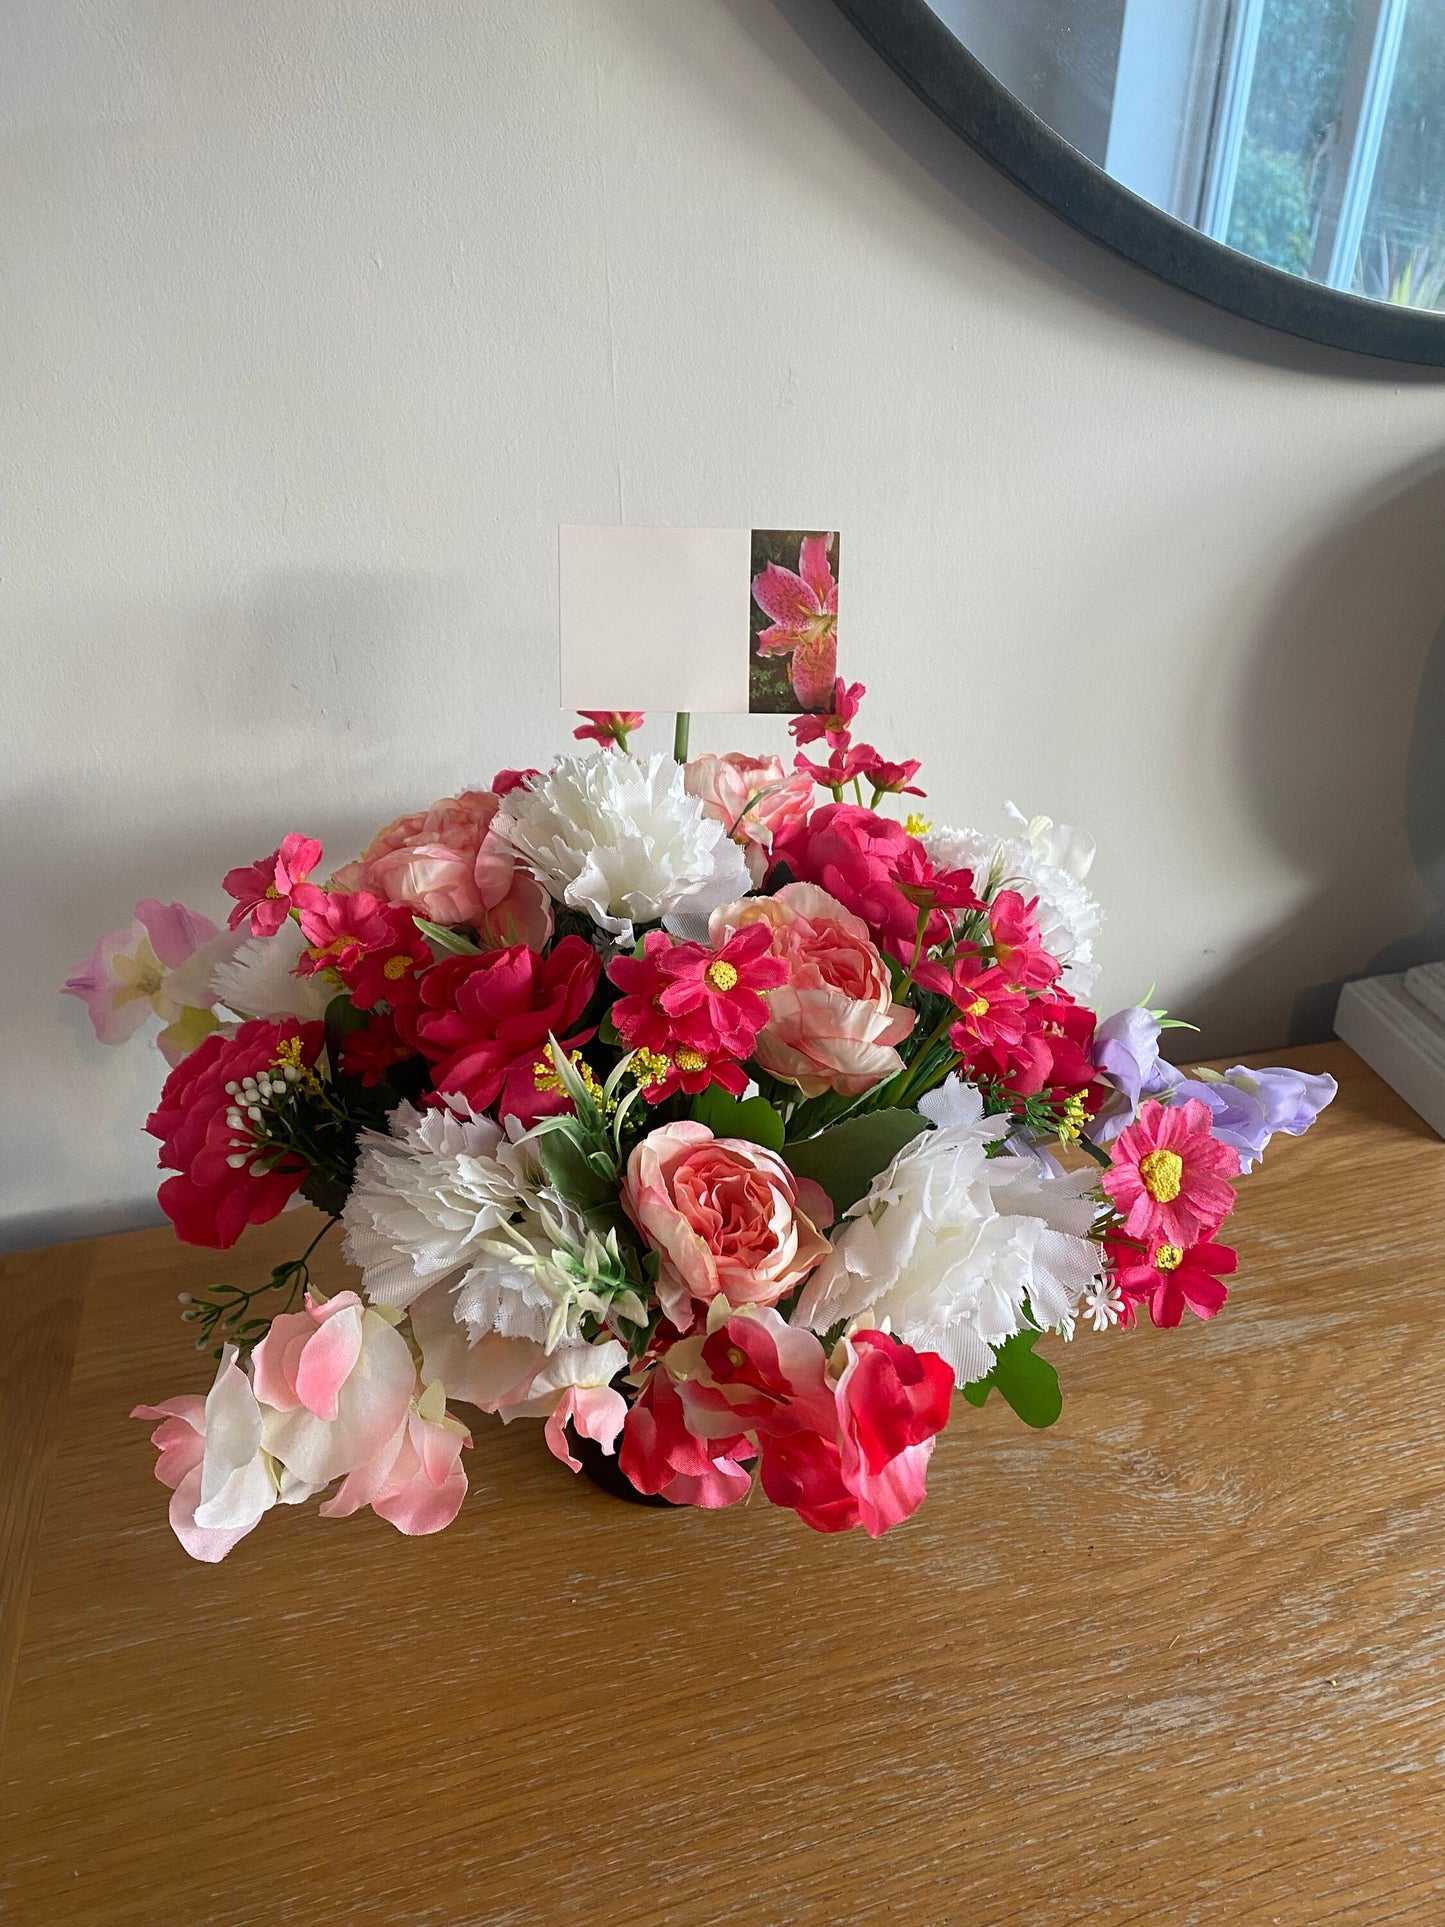 Artificial Grave Flower Arrangement with Peonies, Carnations and Sweet Peas